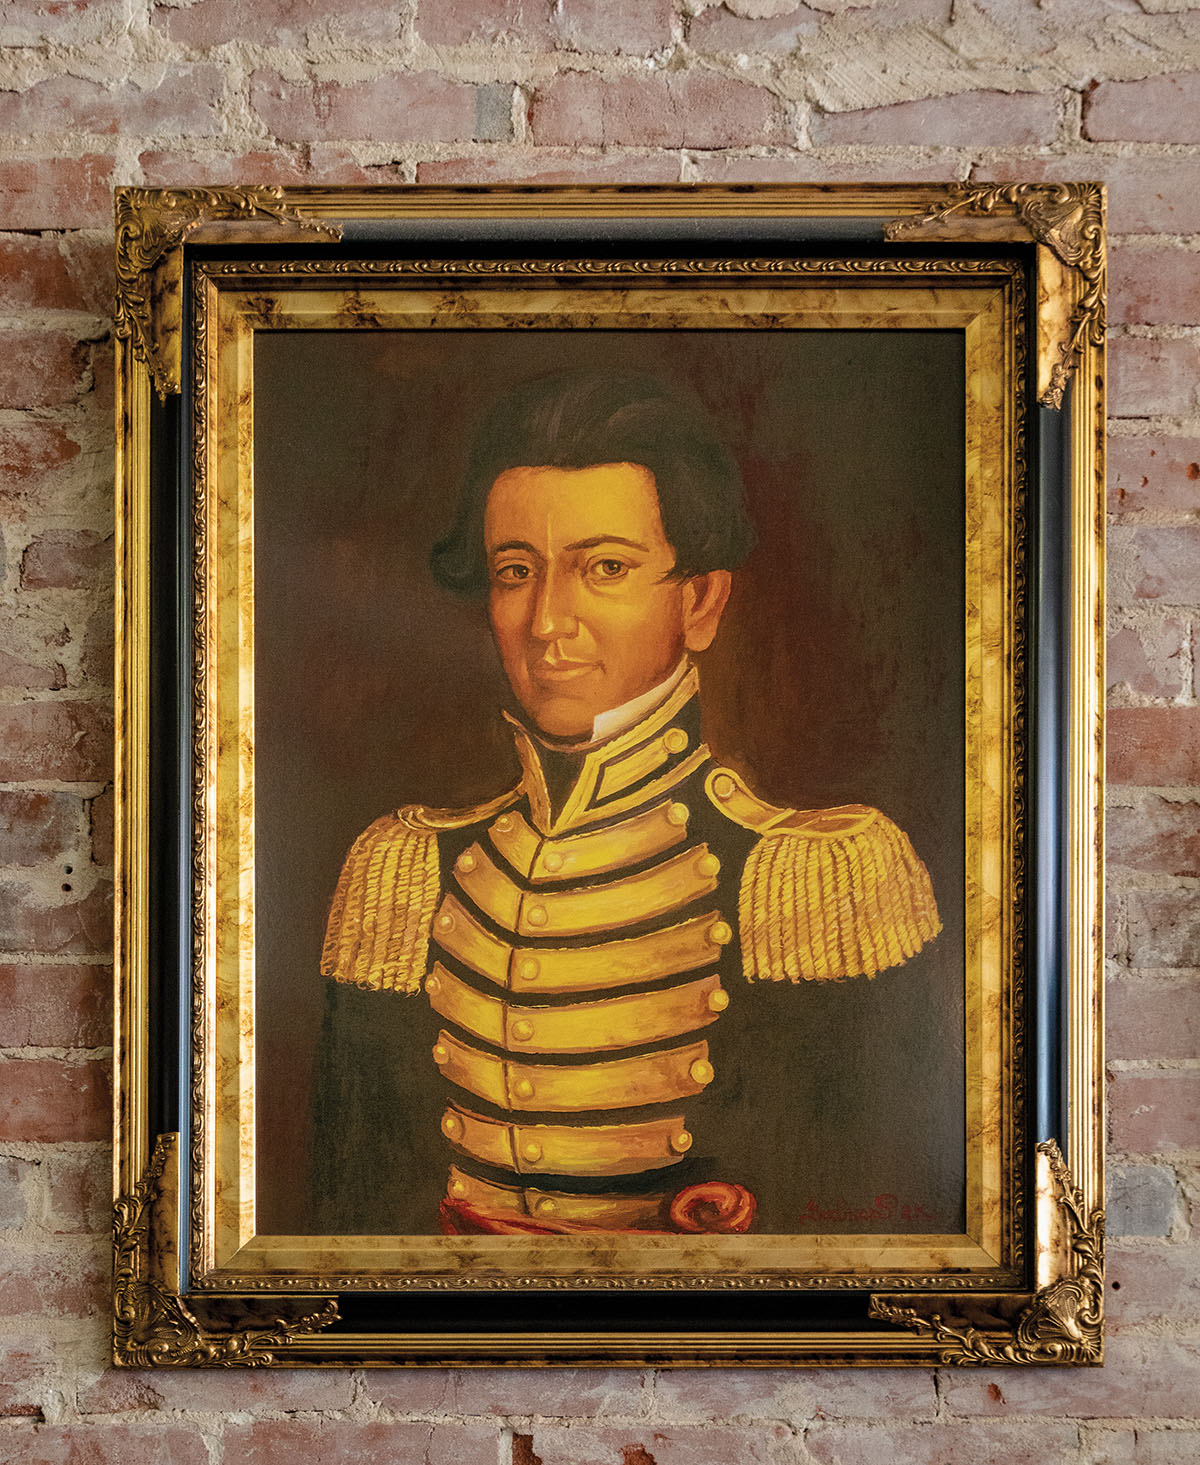 A portrait of a man in gold-adorned shoulder pads and a jacket. Picture hangs on a faded brick wall